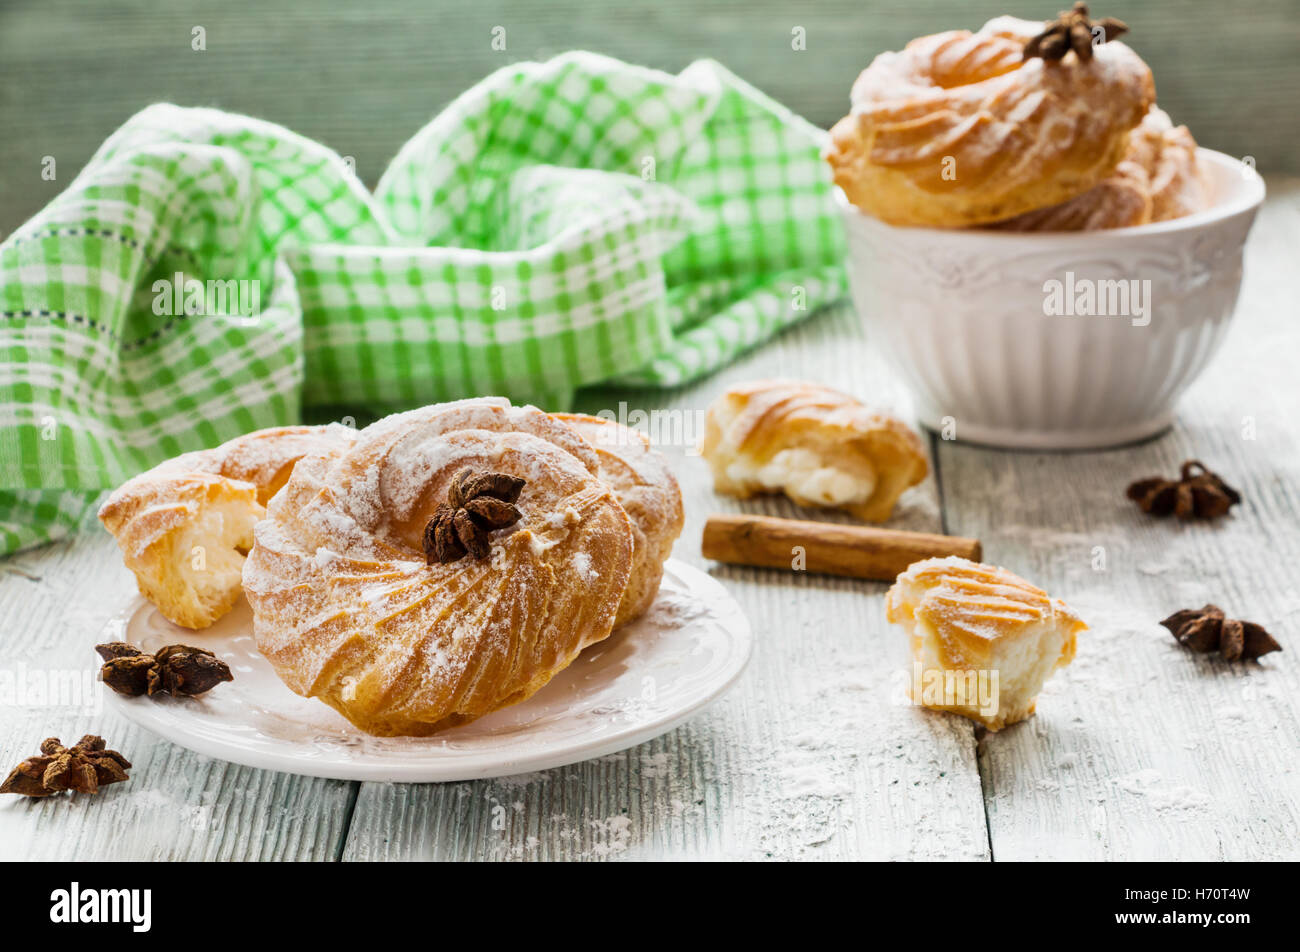 Round cakes with vanilla cream and powdered sugar on a wooden table, white vintage crockery. Stock Photo